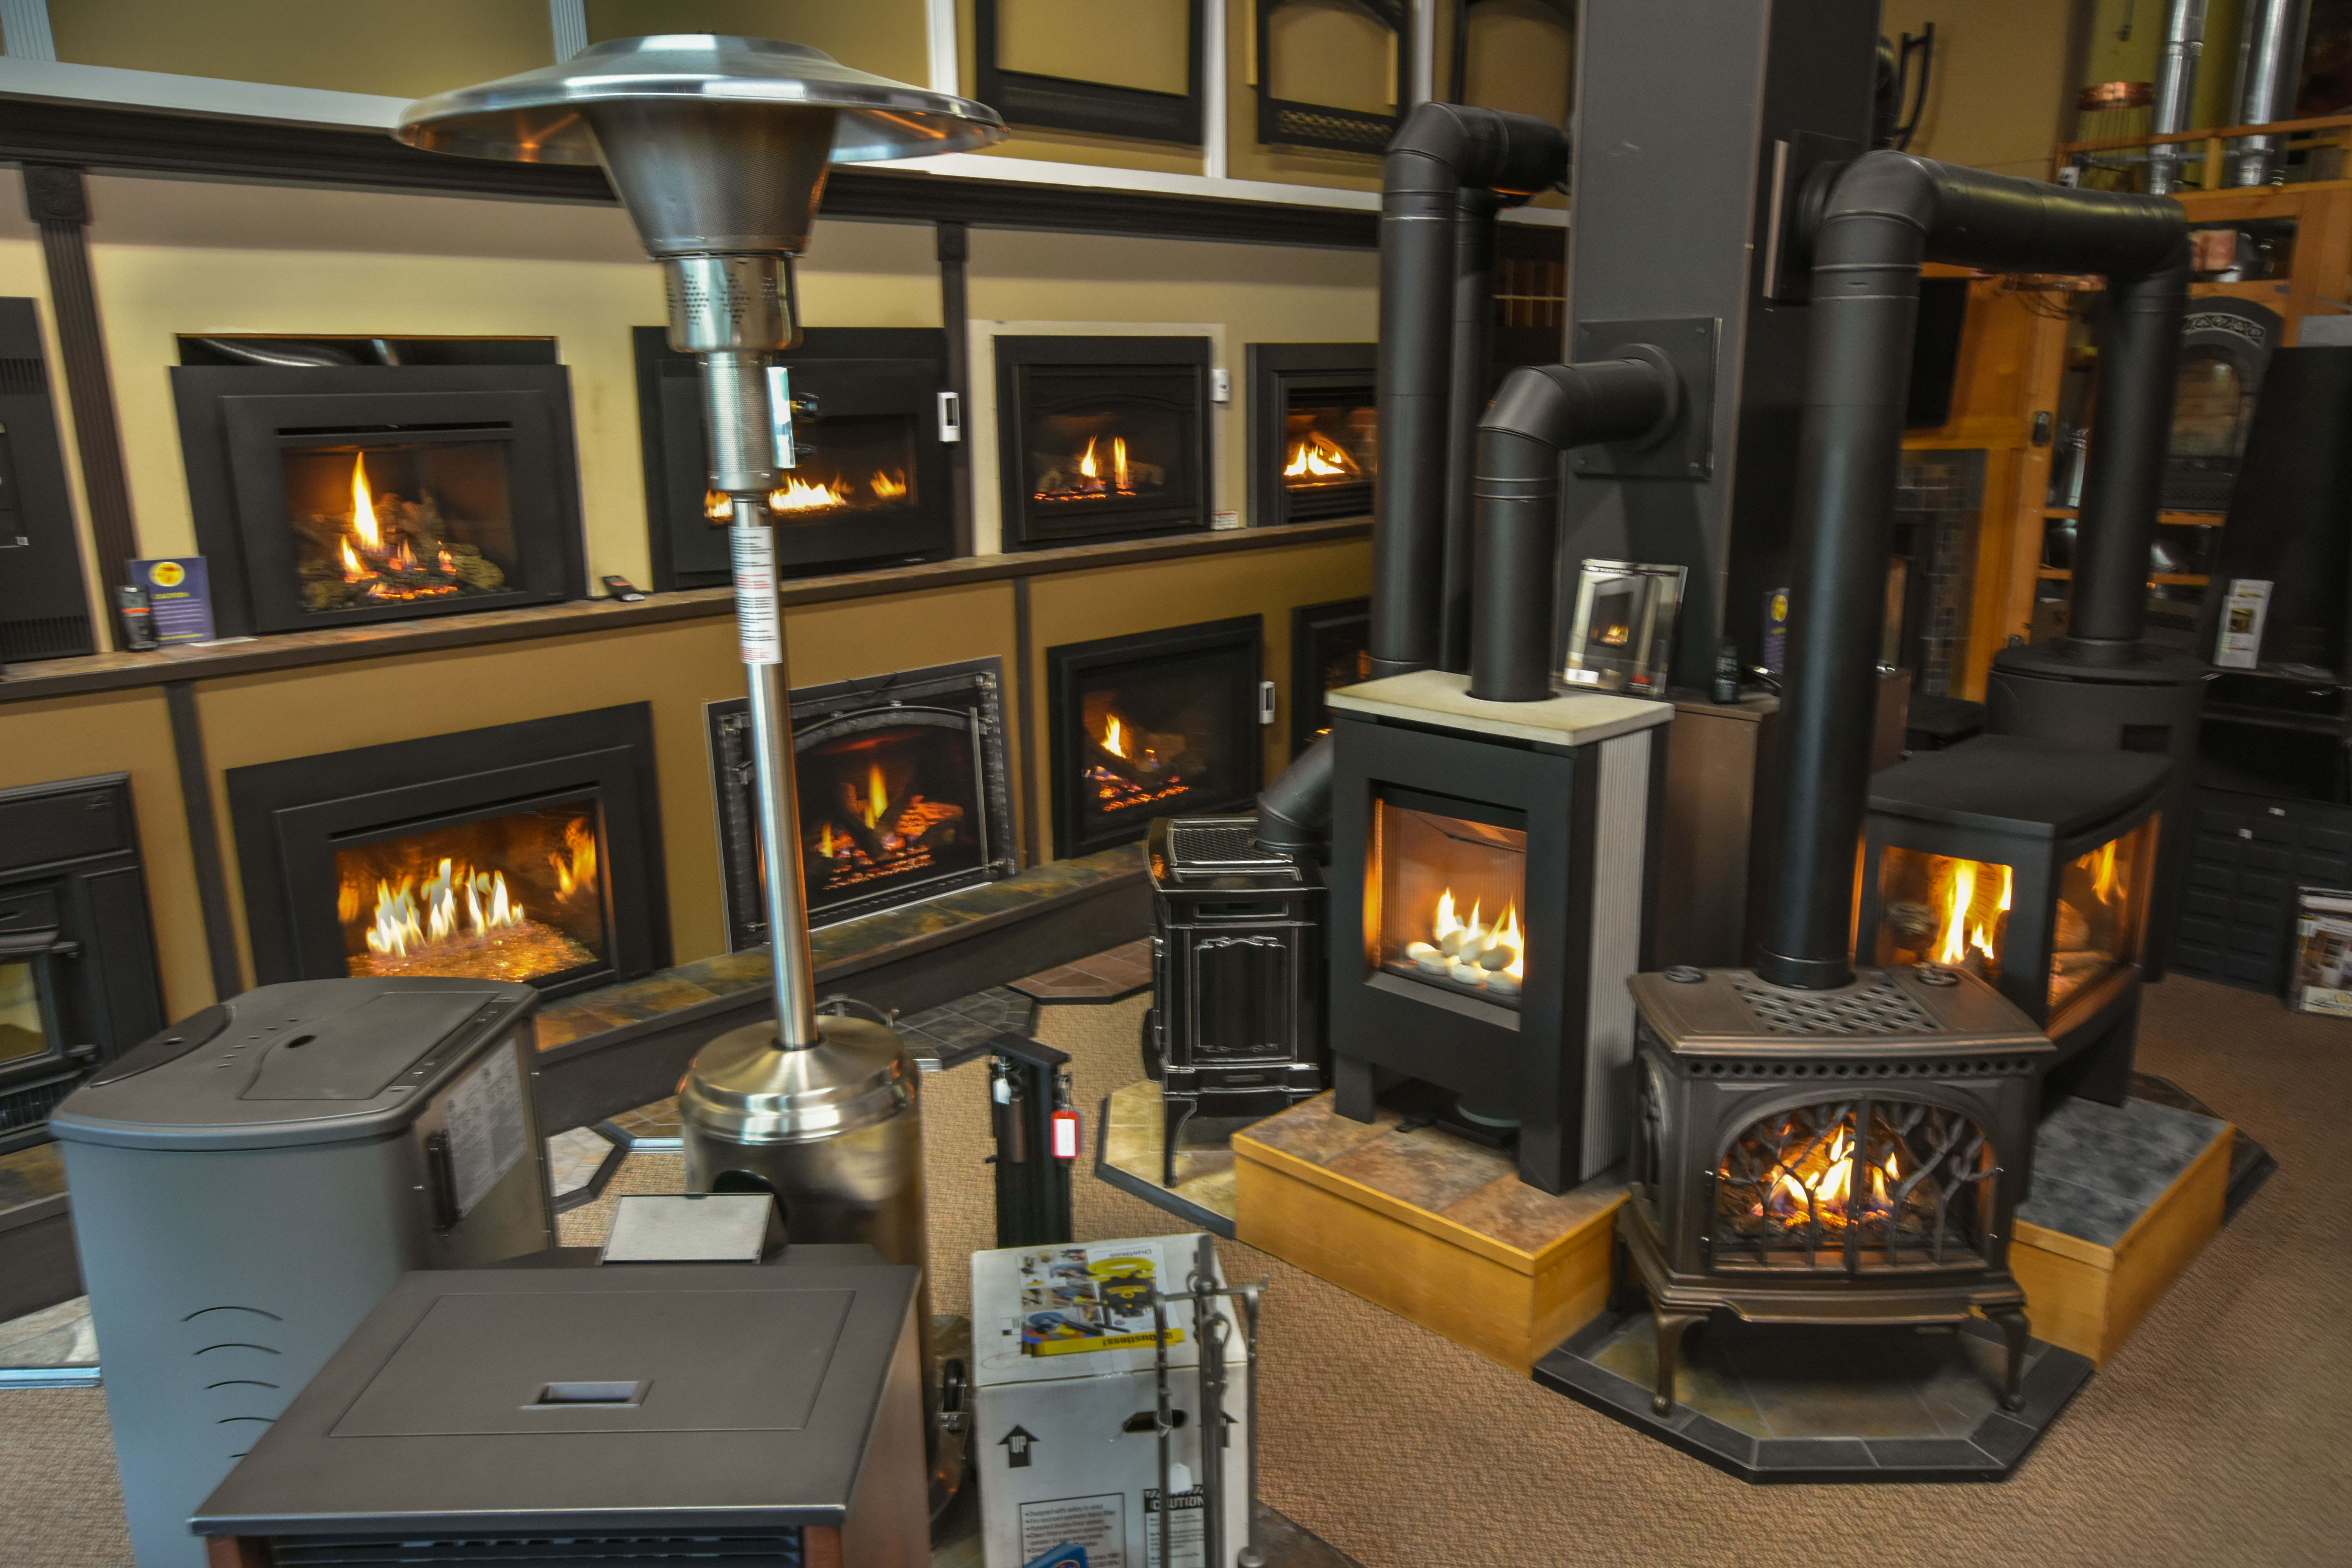 Fireplace Insert Repair Near Me Best Of Lisac S Fireplaces and Stoves Portland oregon